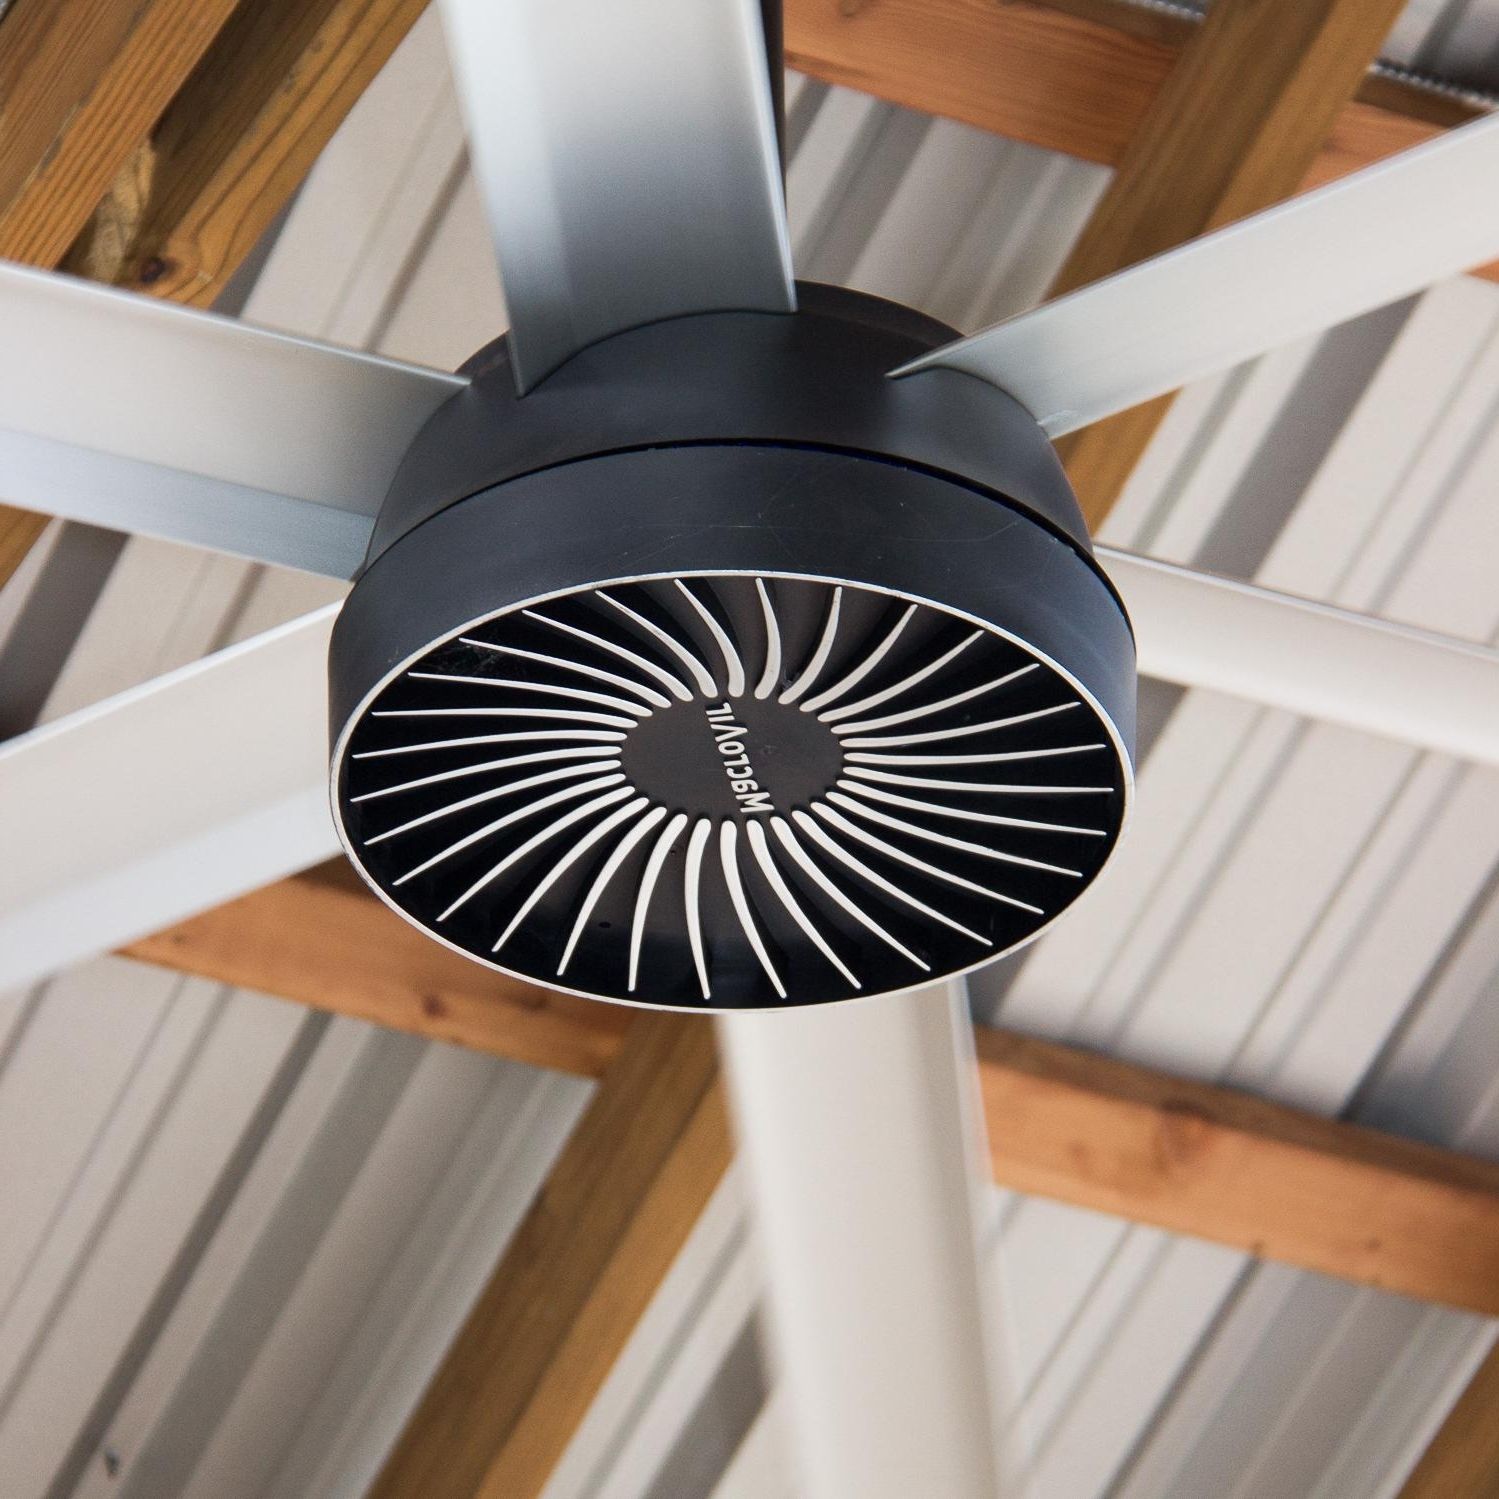 Most Popular Outdoor Ceiling Fans With Aluminum Blades Pertaining To Macroair Airvolution D 370 12 Ft (View 12 of 20)